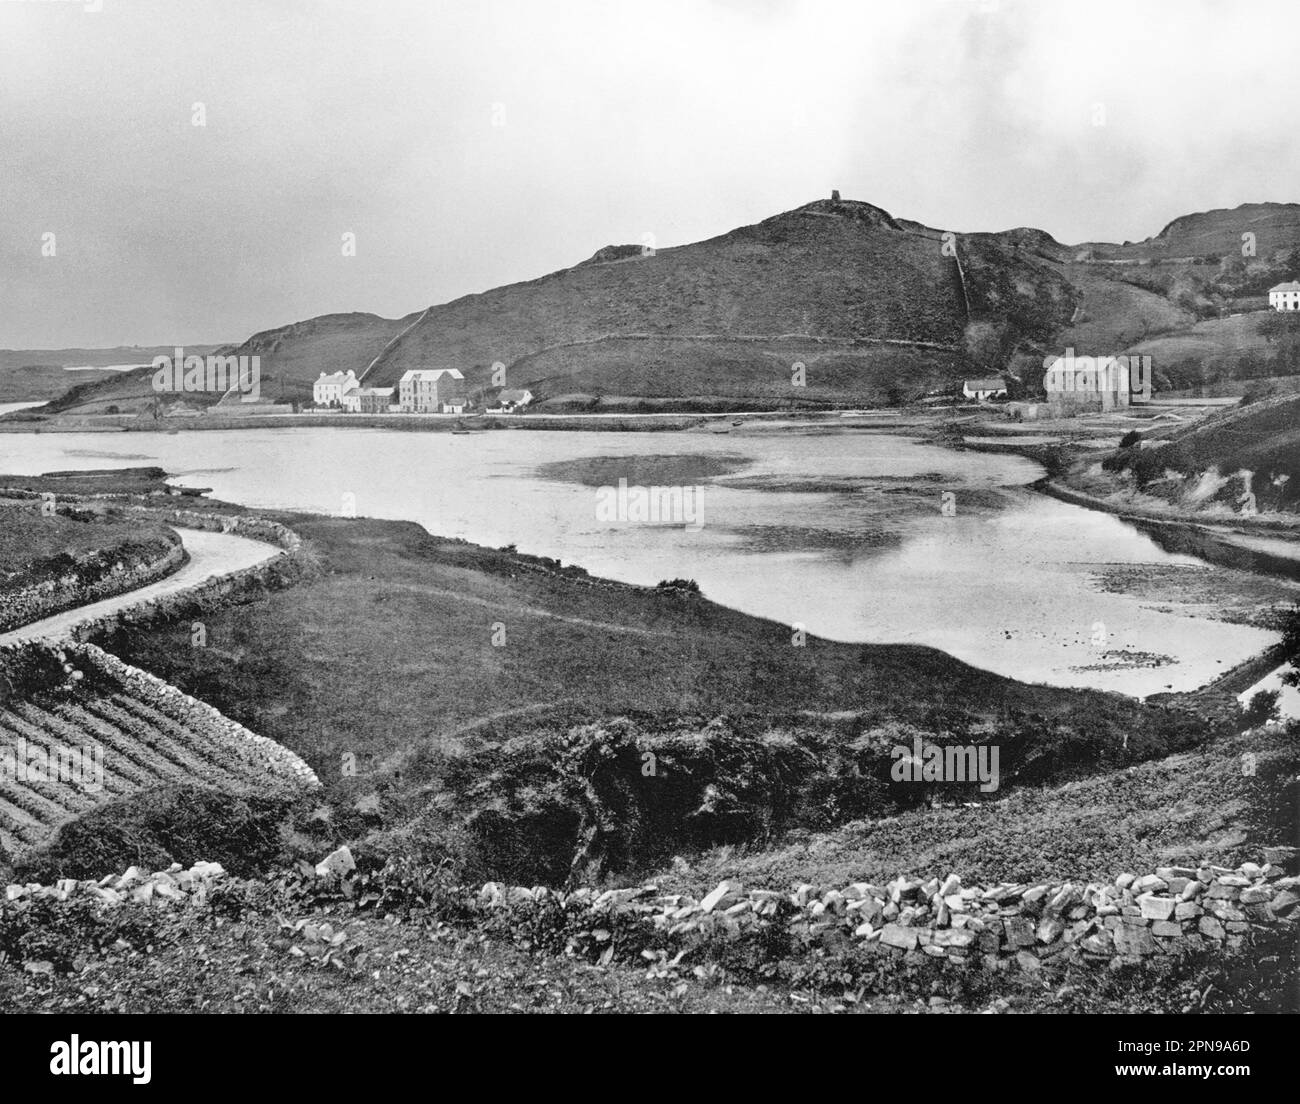 A late 19th century view of Clifden Harbour where the Owenglin River flows into Clifden Bay. A coastal town in County Galway, Ireland, it was founded at the start of the 19th century by John D'Arcy (1785–1839) who lived in Clifden Castle. Stock Photo